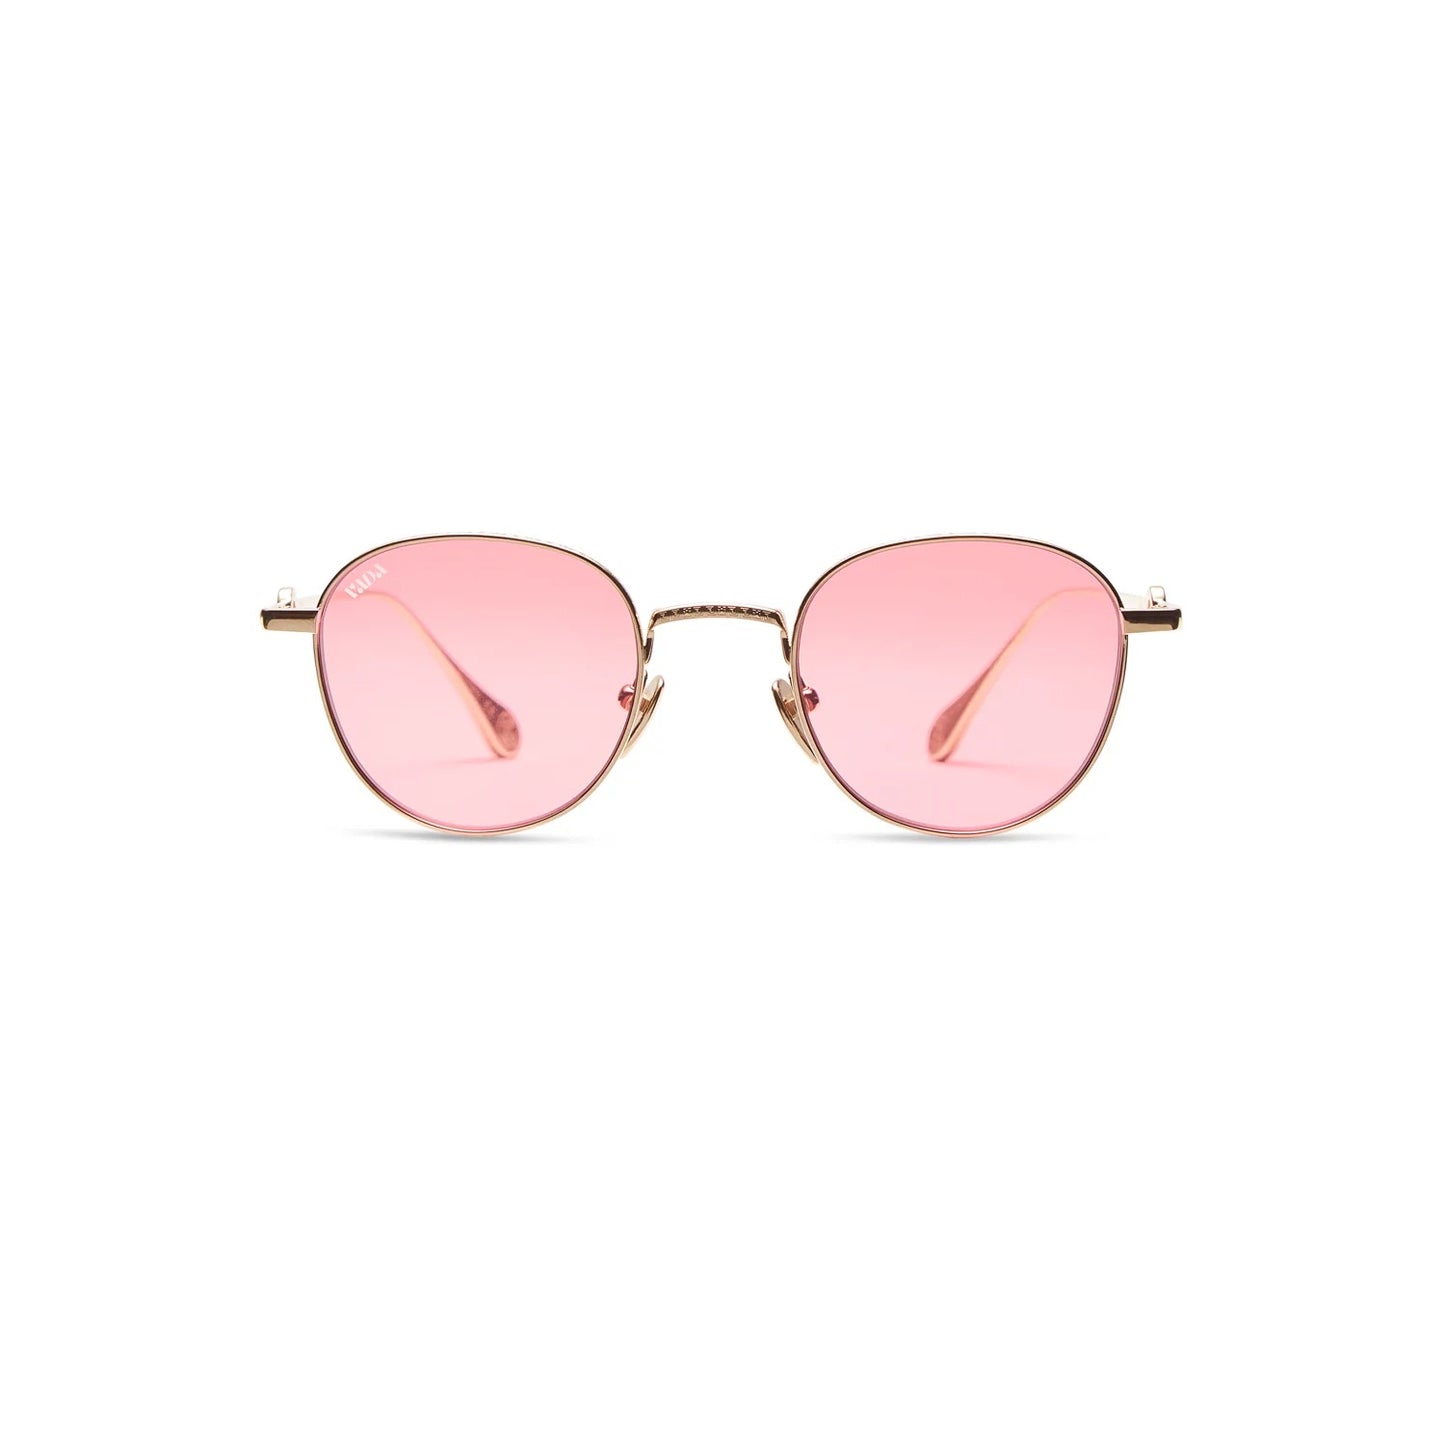 Orb Sunglasses by VADA